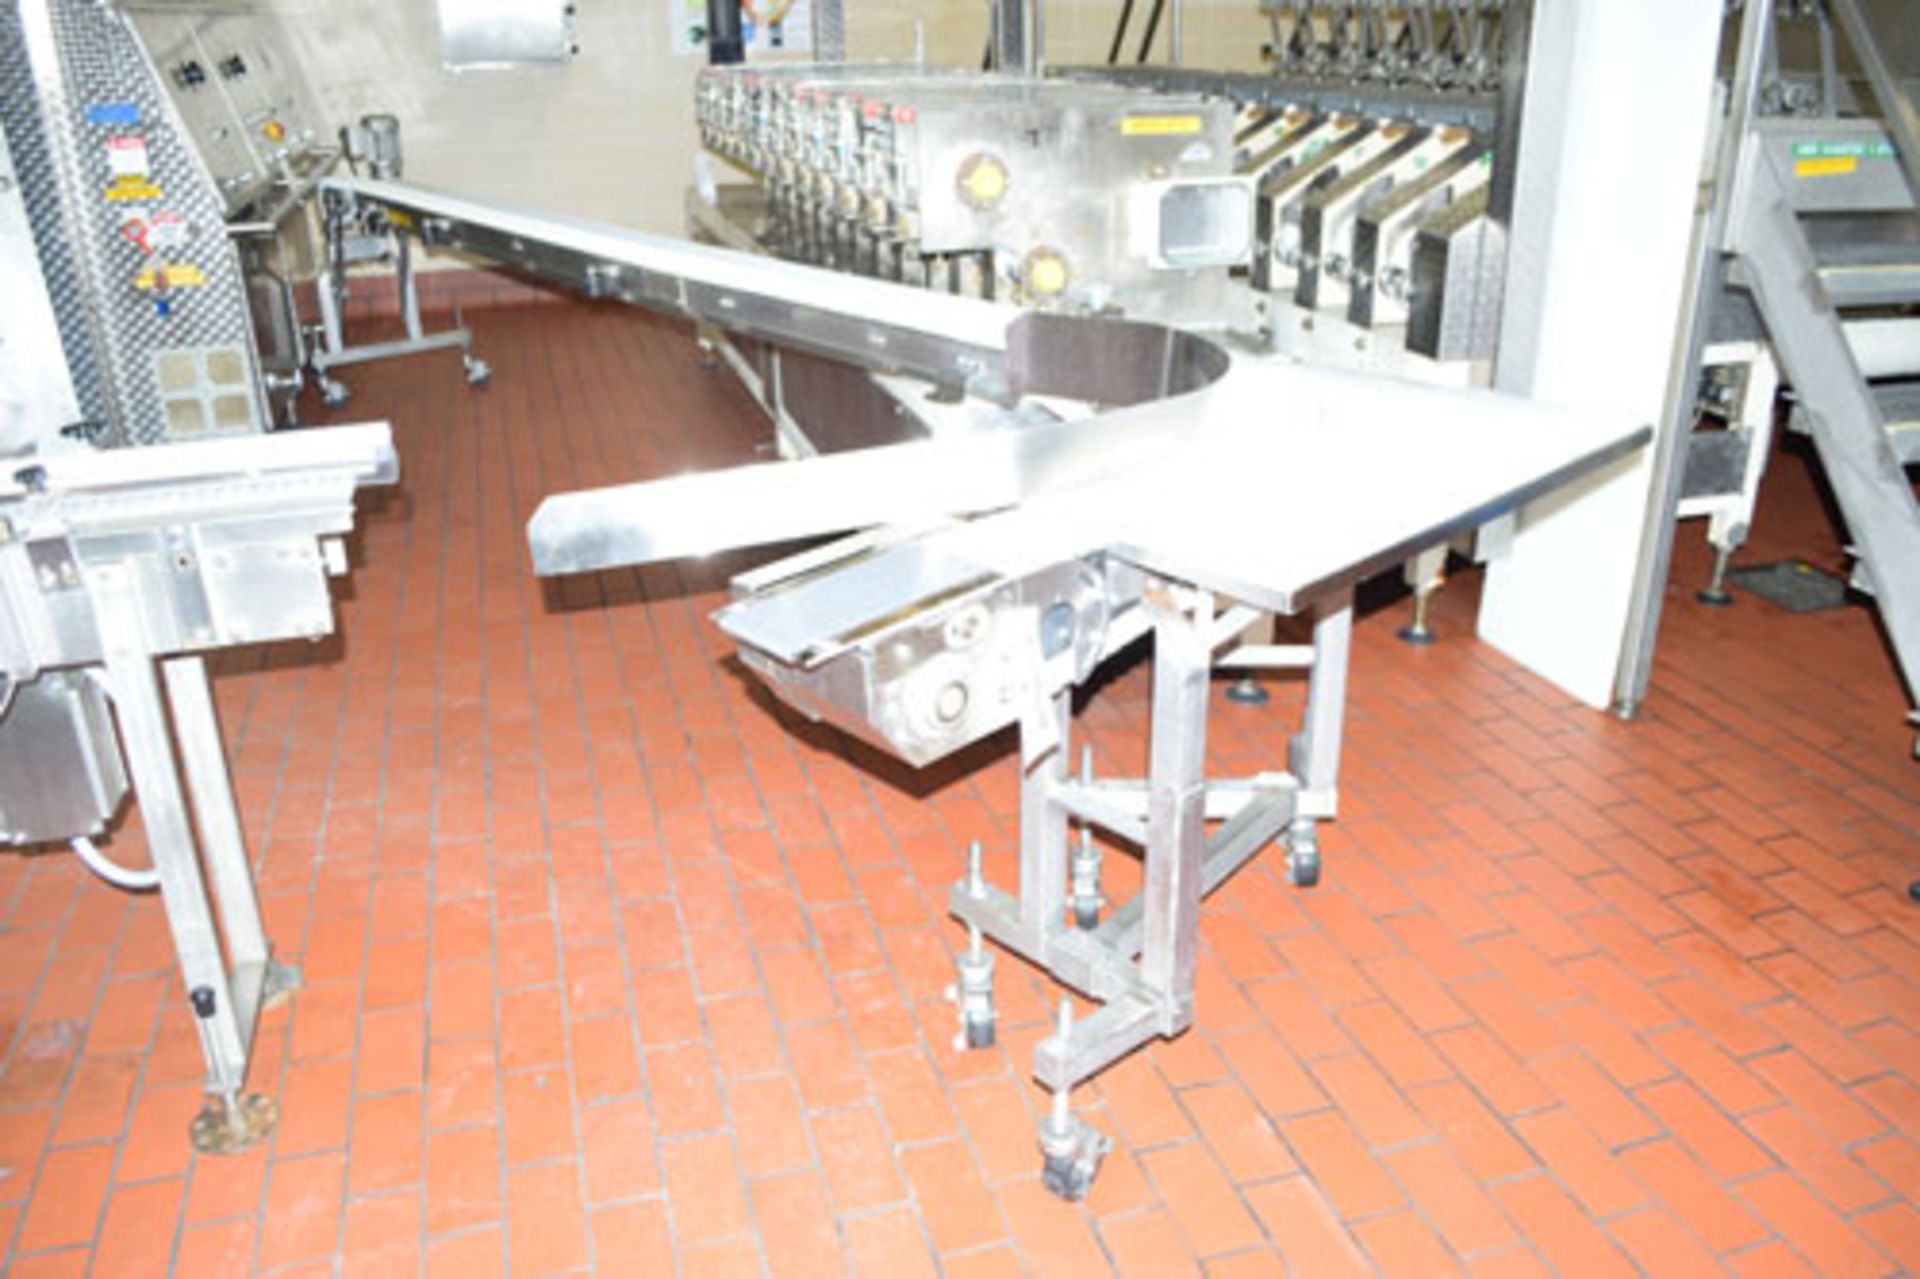 Natec chill roll stand (3 chrome plated cored rolls and 2 cored press rolls), Natec cold knife - Image 53 of 59